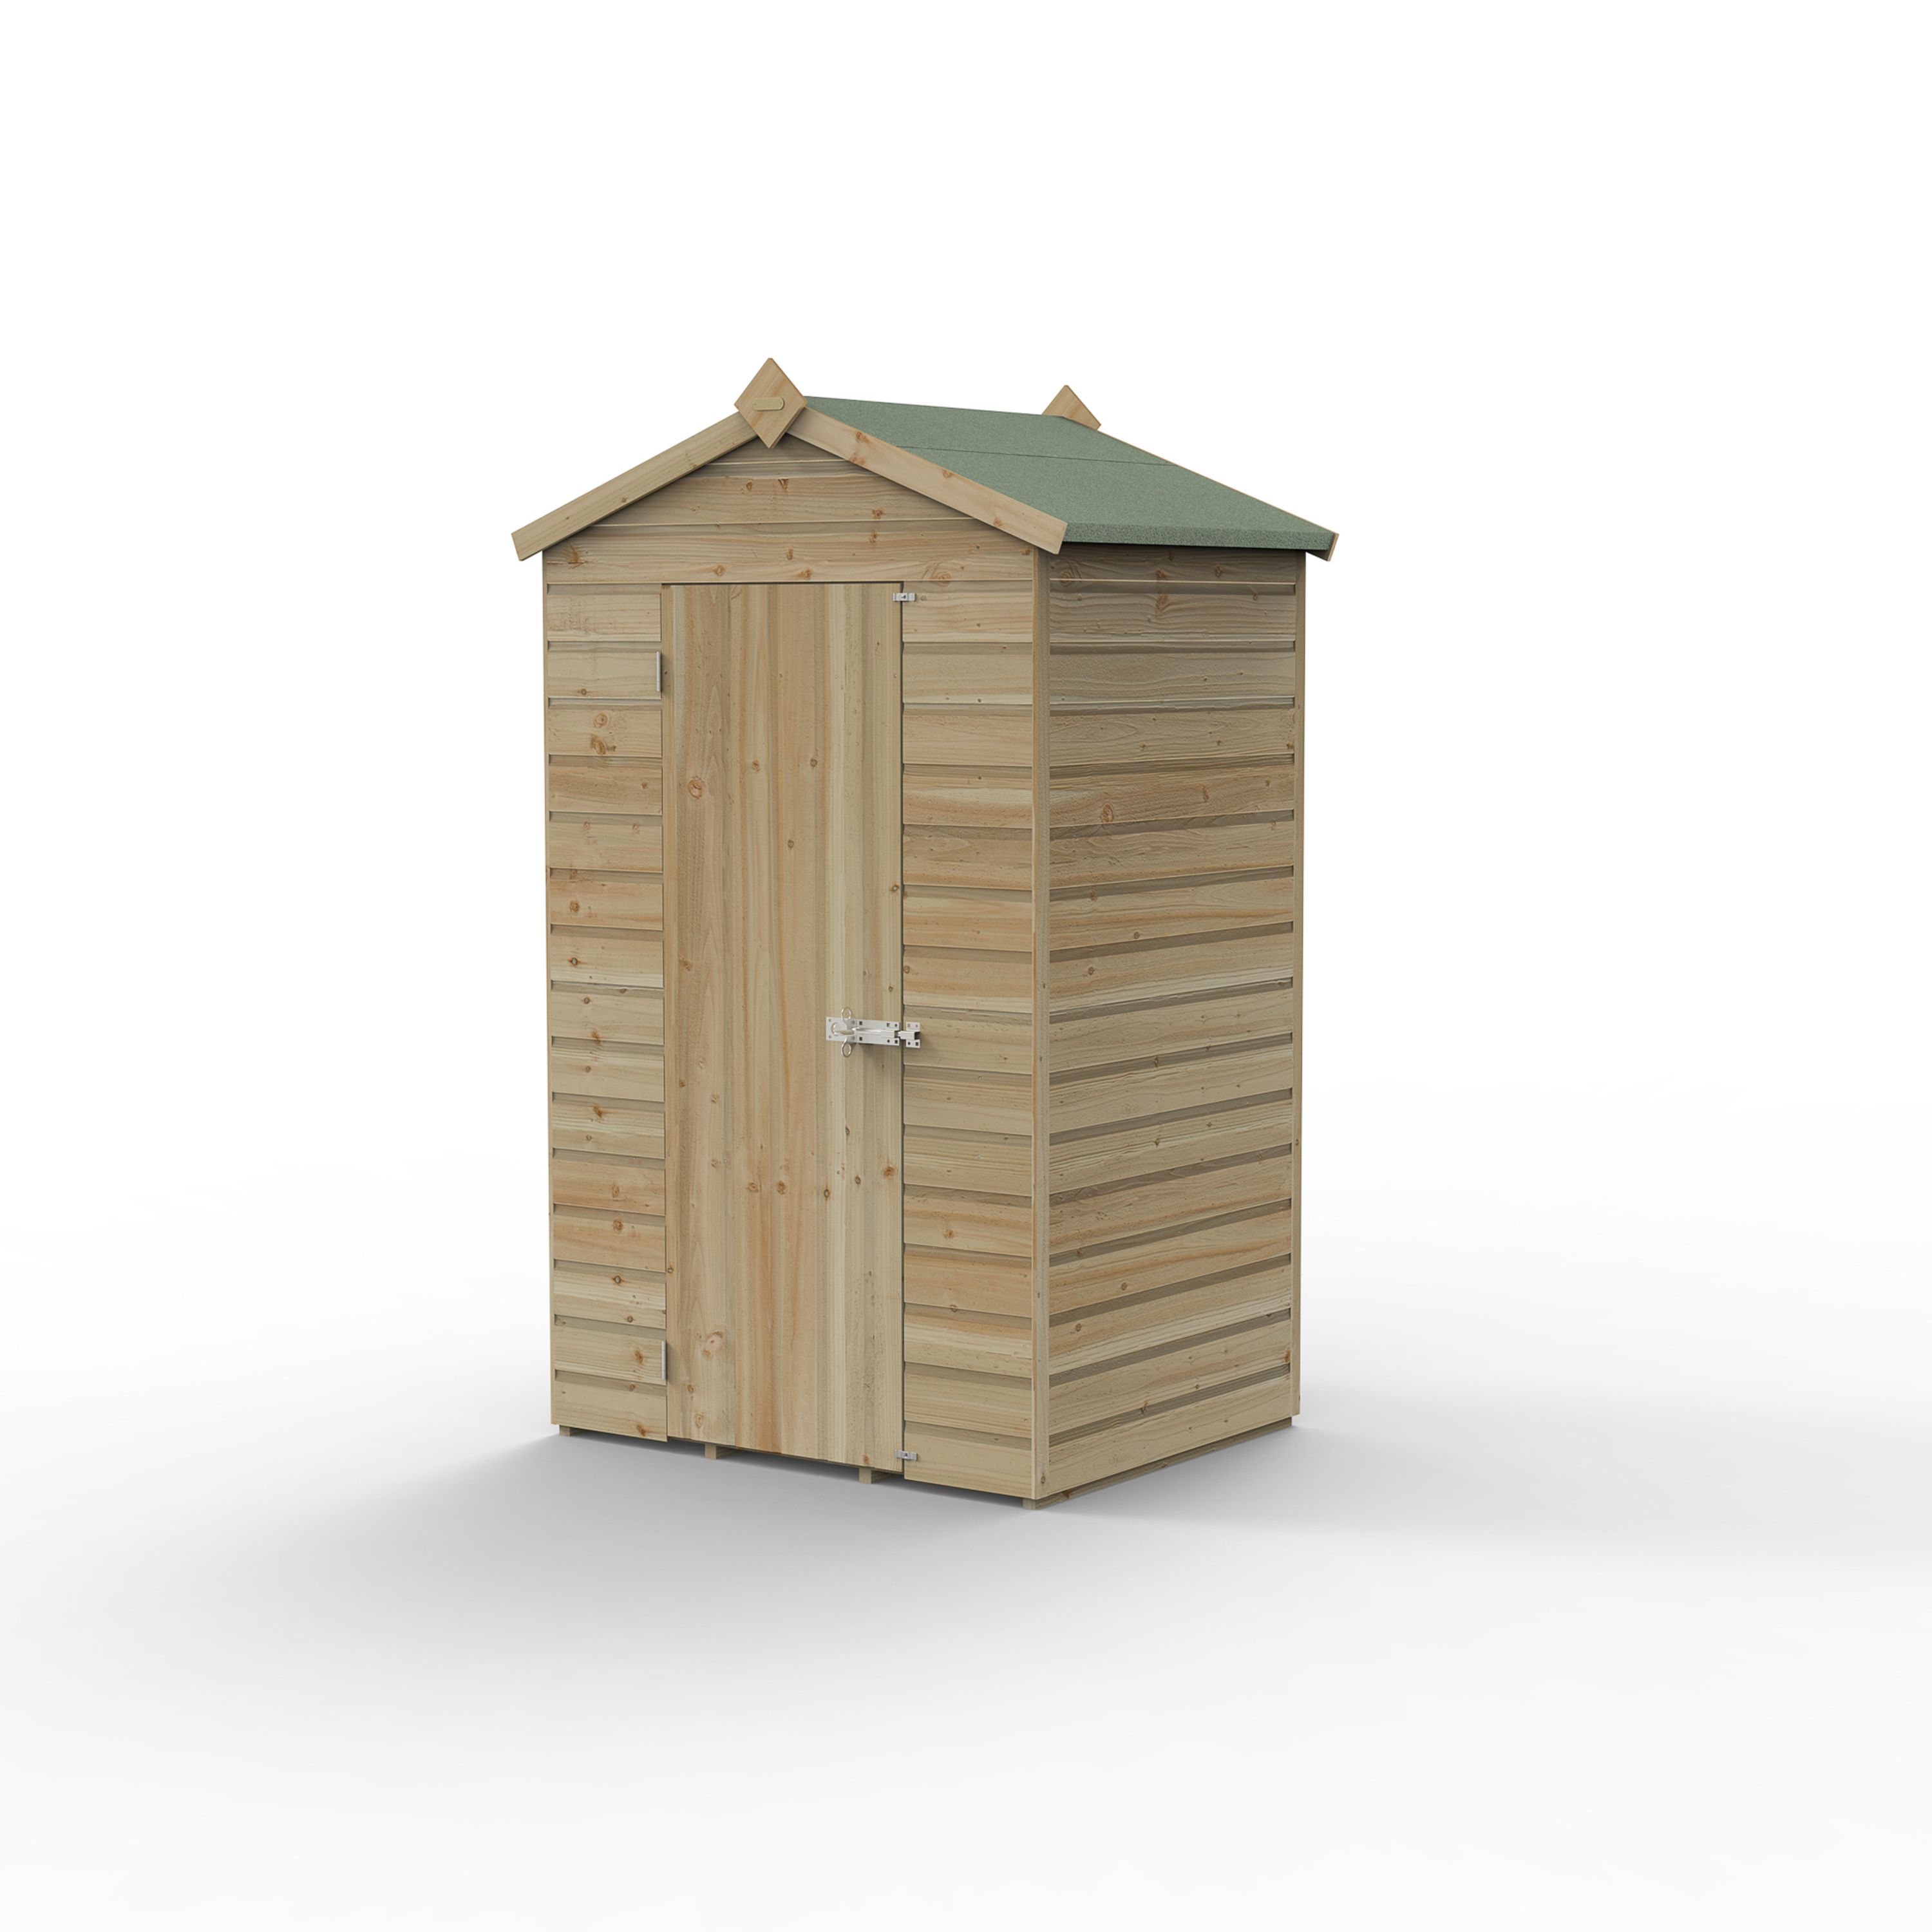 Forest Garden Beckwood 4x3 ft Apex Natural timber Wooden Shed with floor - Assembly not required